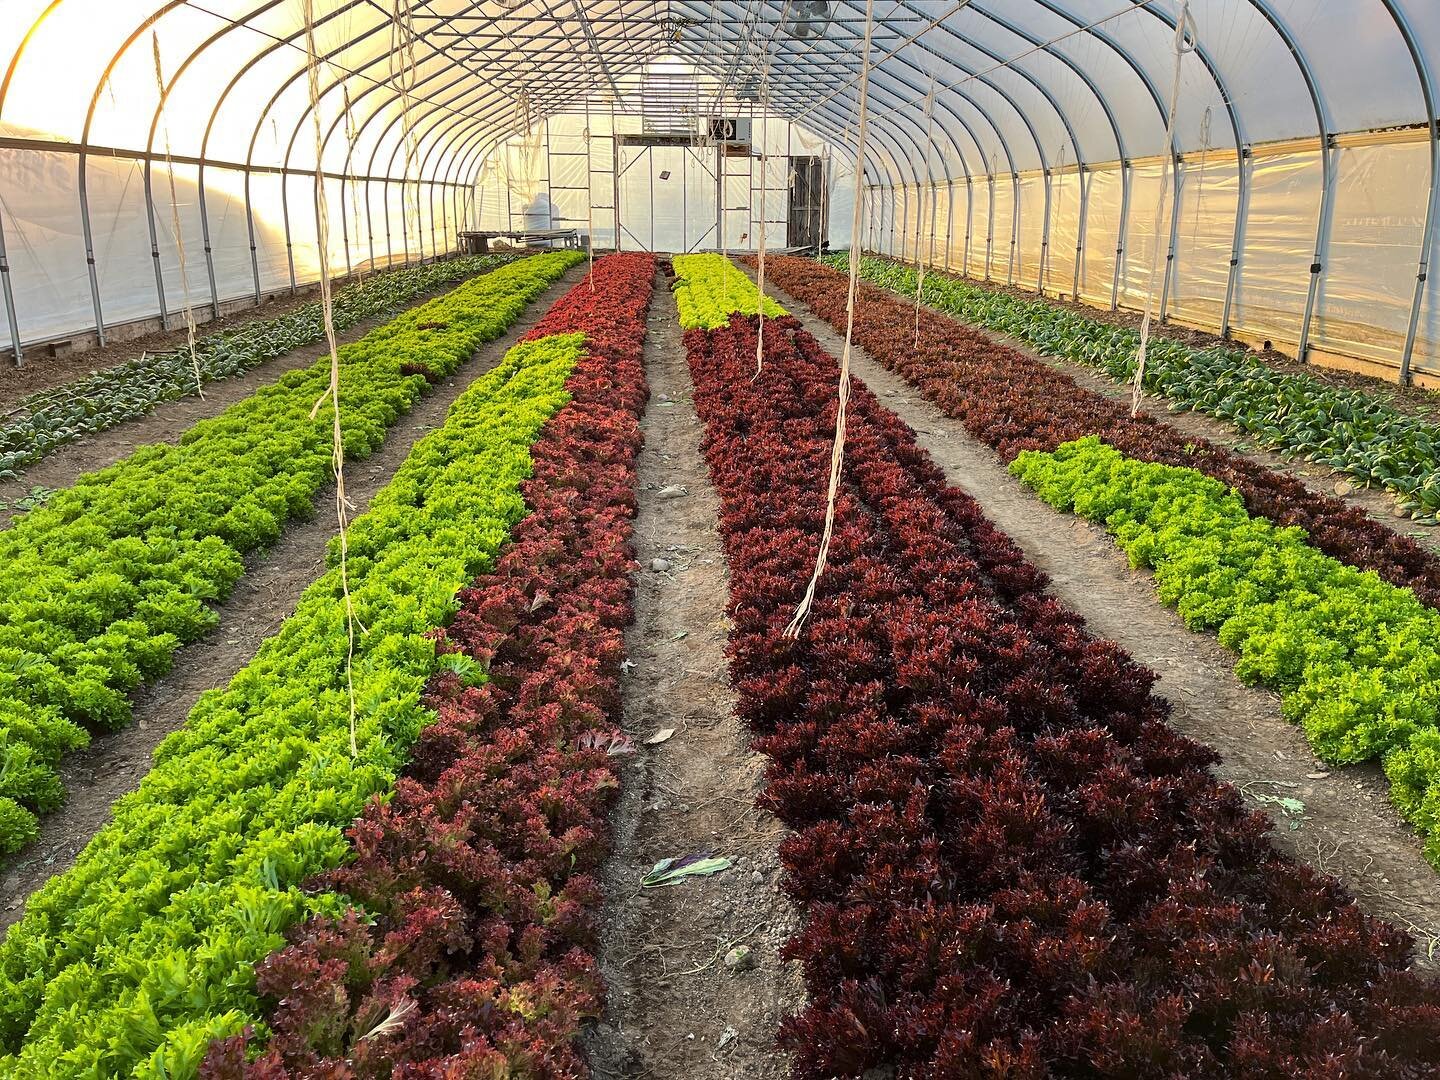 Today is our final CSA pick-up of the season. 26 weeks of veggies seeded, transplanted, weeded, harvested, washed and packed by hand by our amazing team.

Thank you to our CSA members for supporting our farm and making a steadfast commitment to local